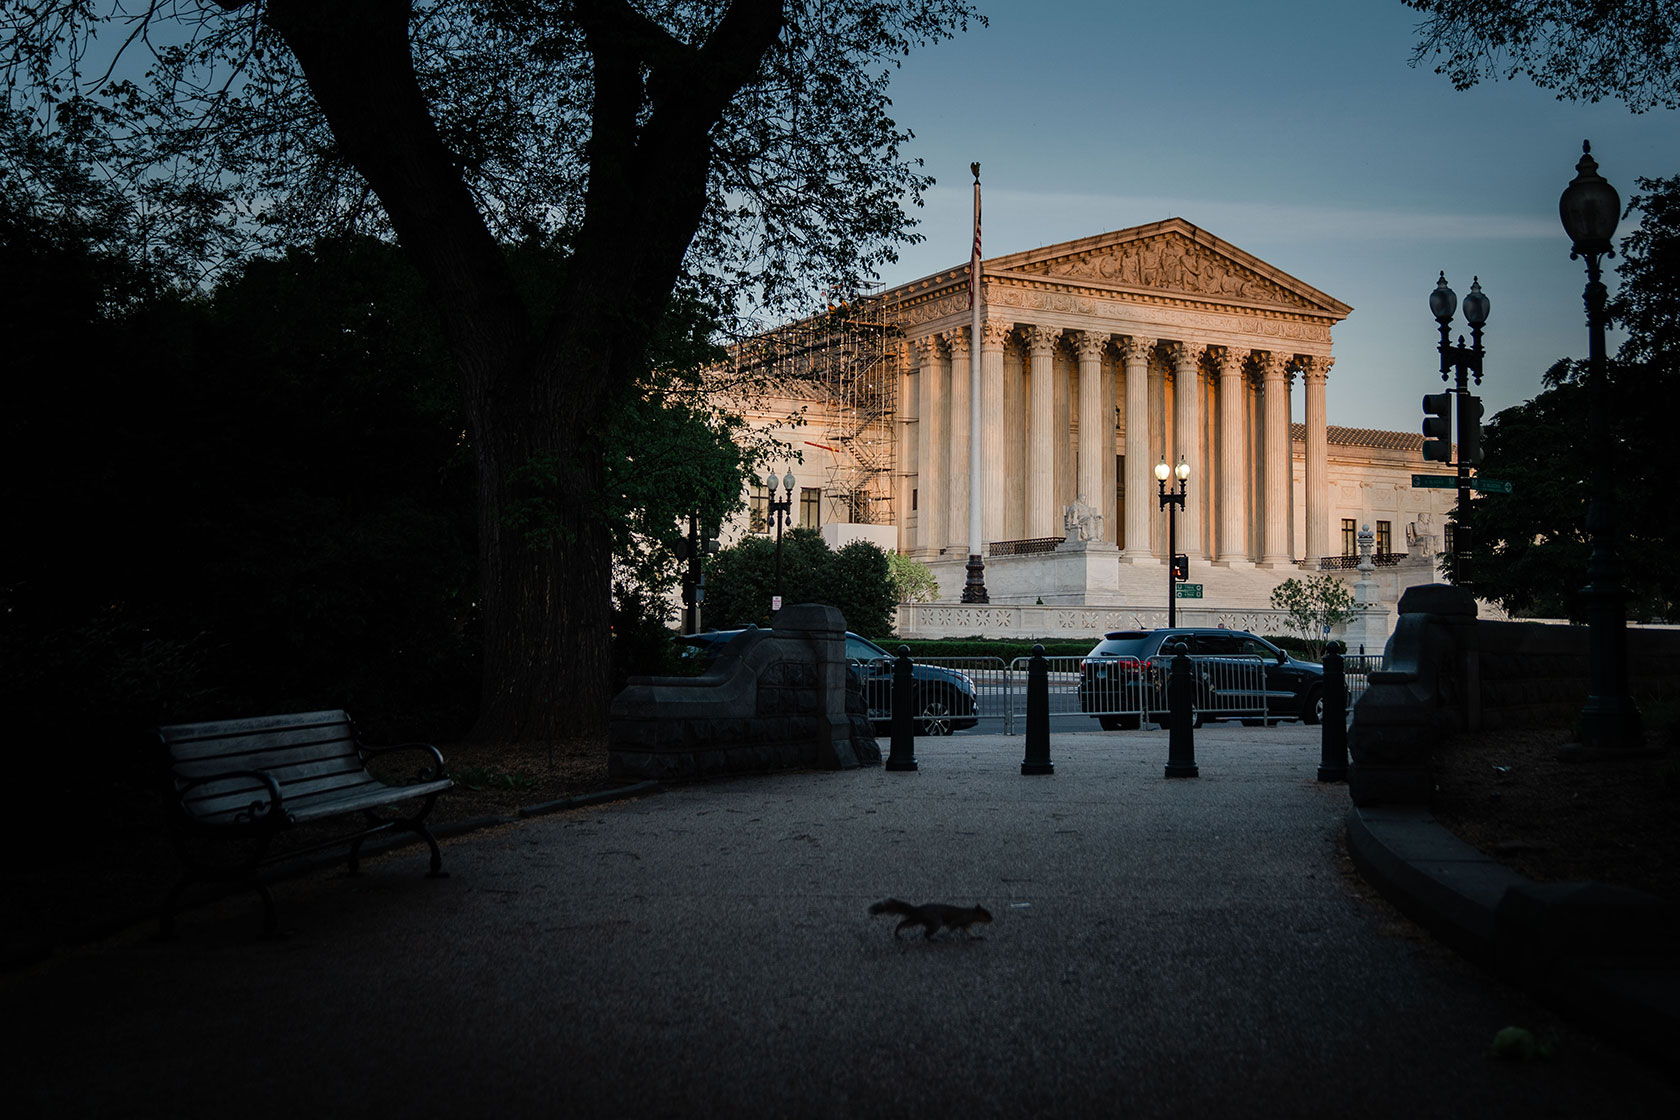 The U.S. Supreme Court building is pictured.